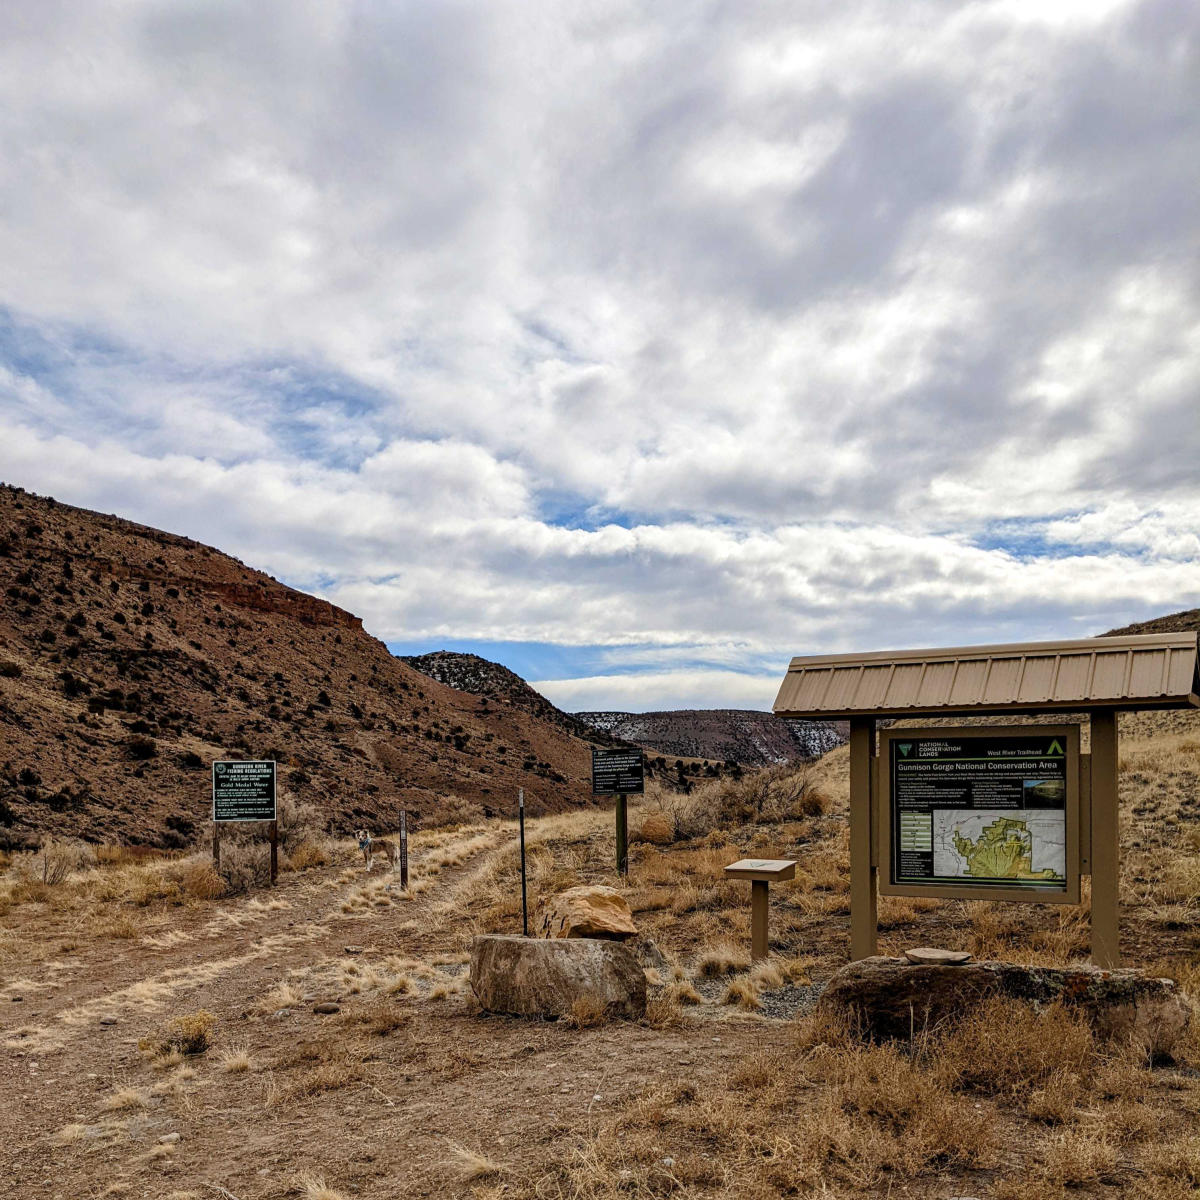 West River Trailhead with map and registration area surrounded by dirt and canyon walls in the Gunnison Gorge near Delta, Colorado.